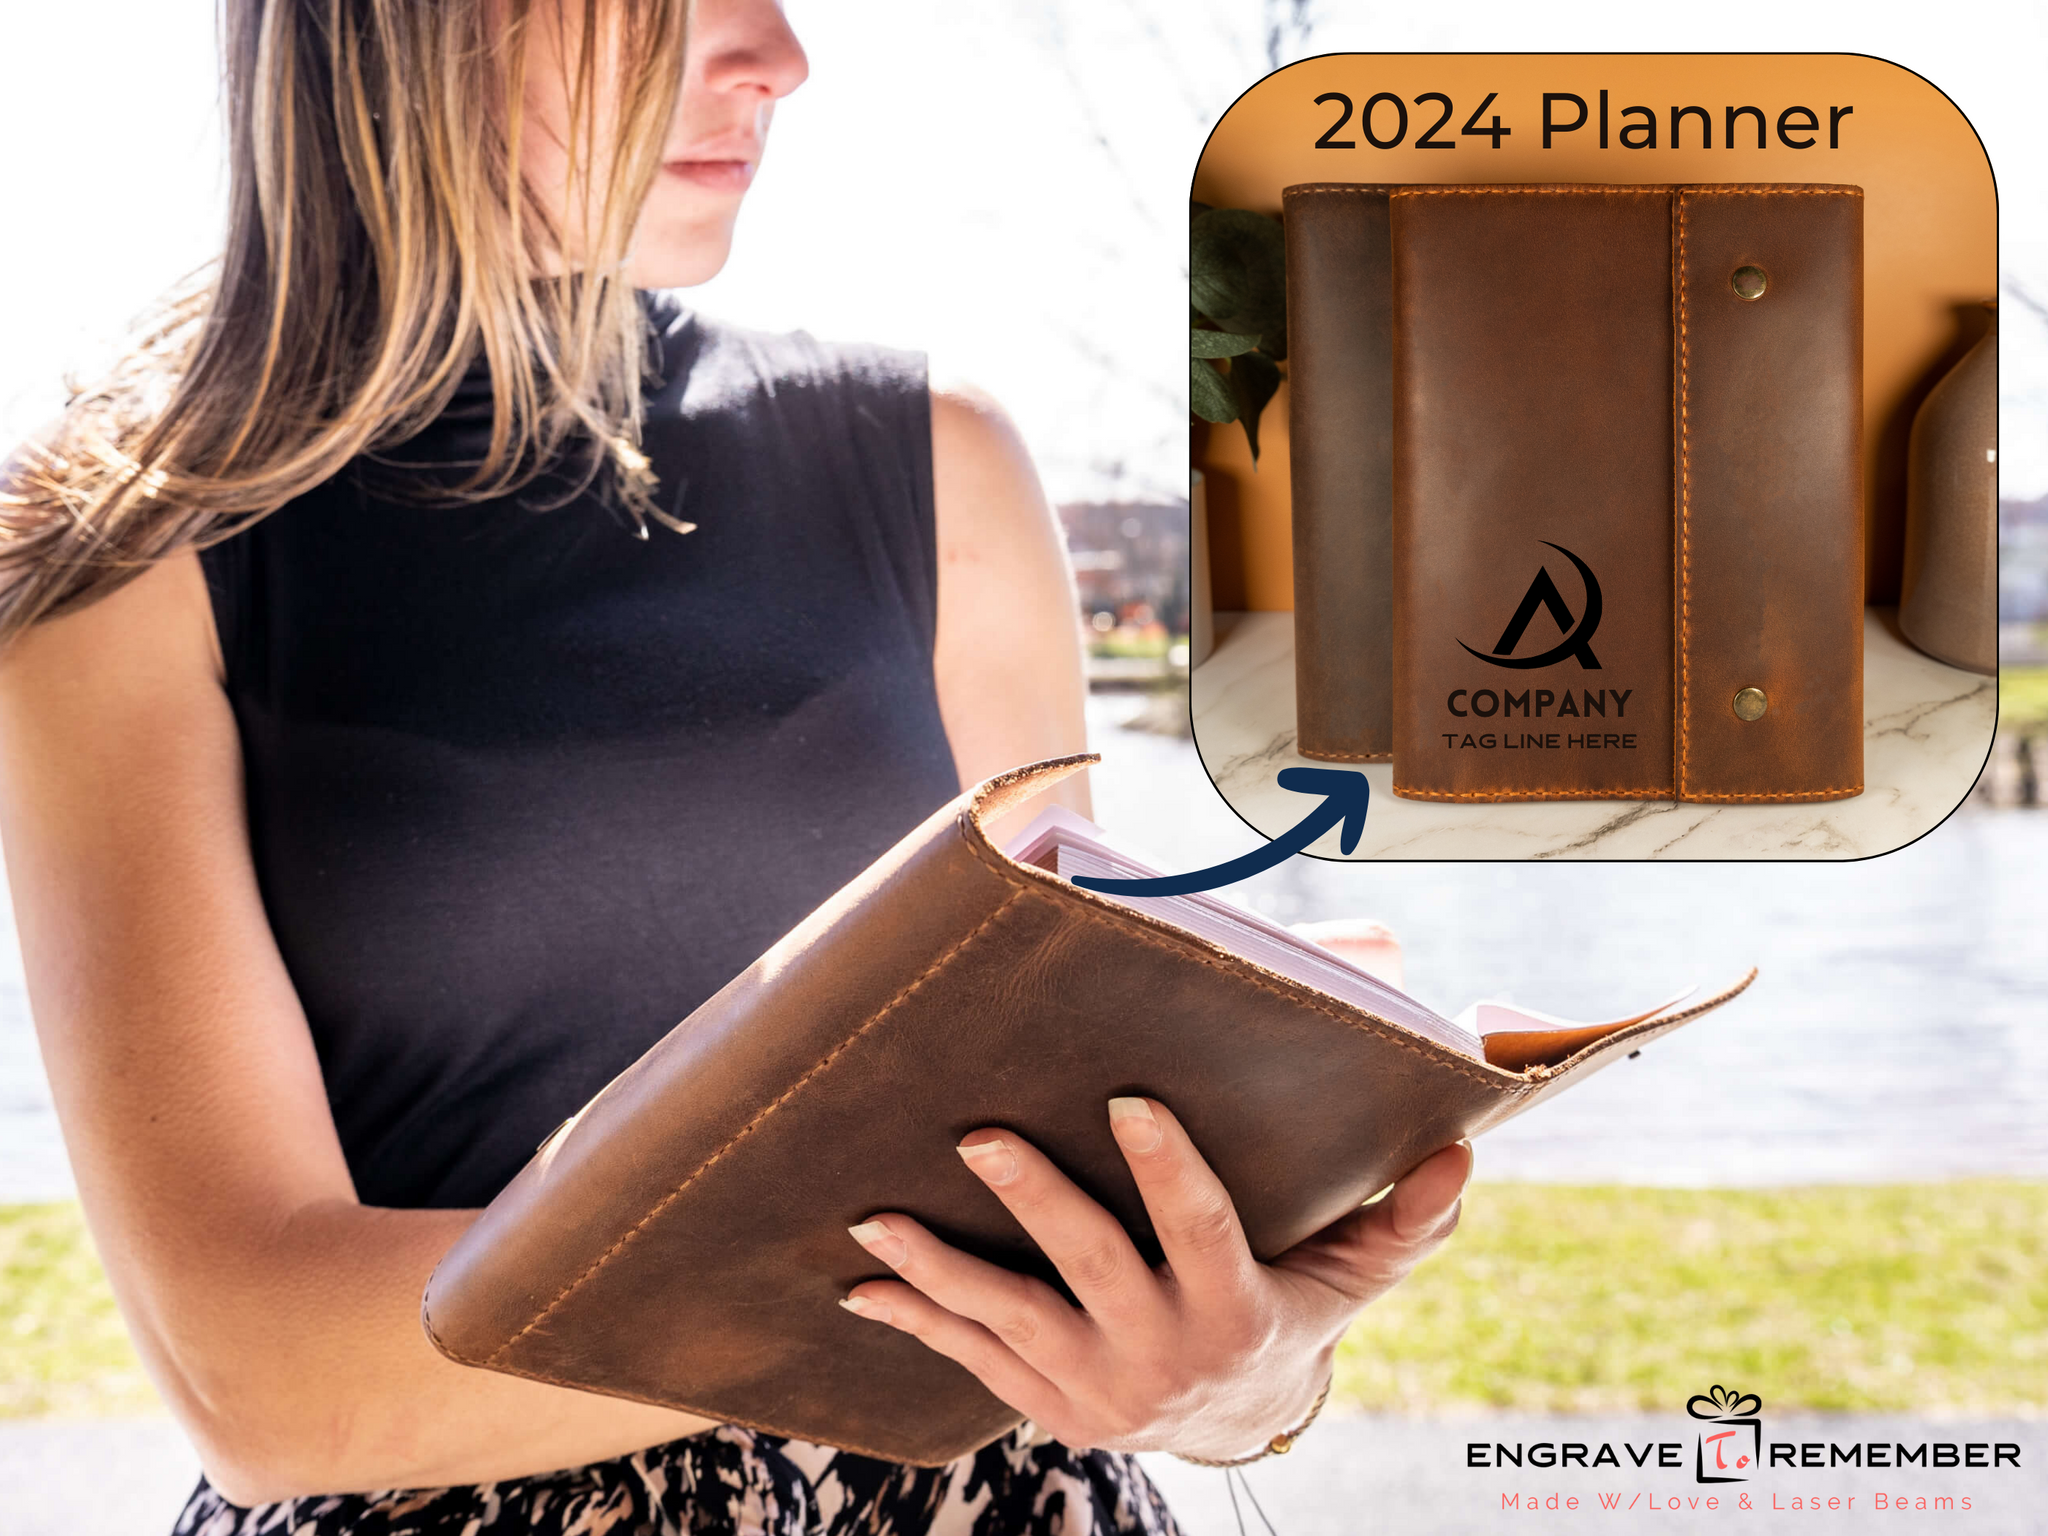 2024 Planner+ Refillable Hand-stitched Personalized Leather Cover